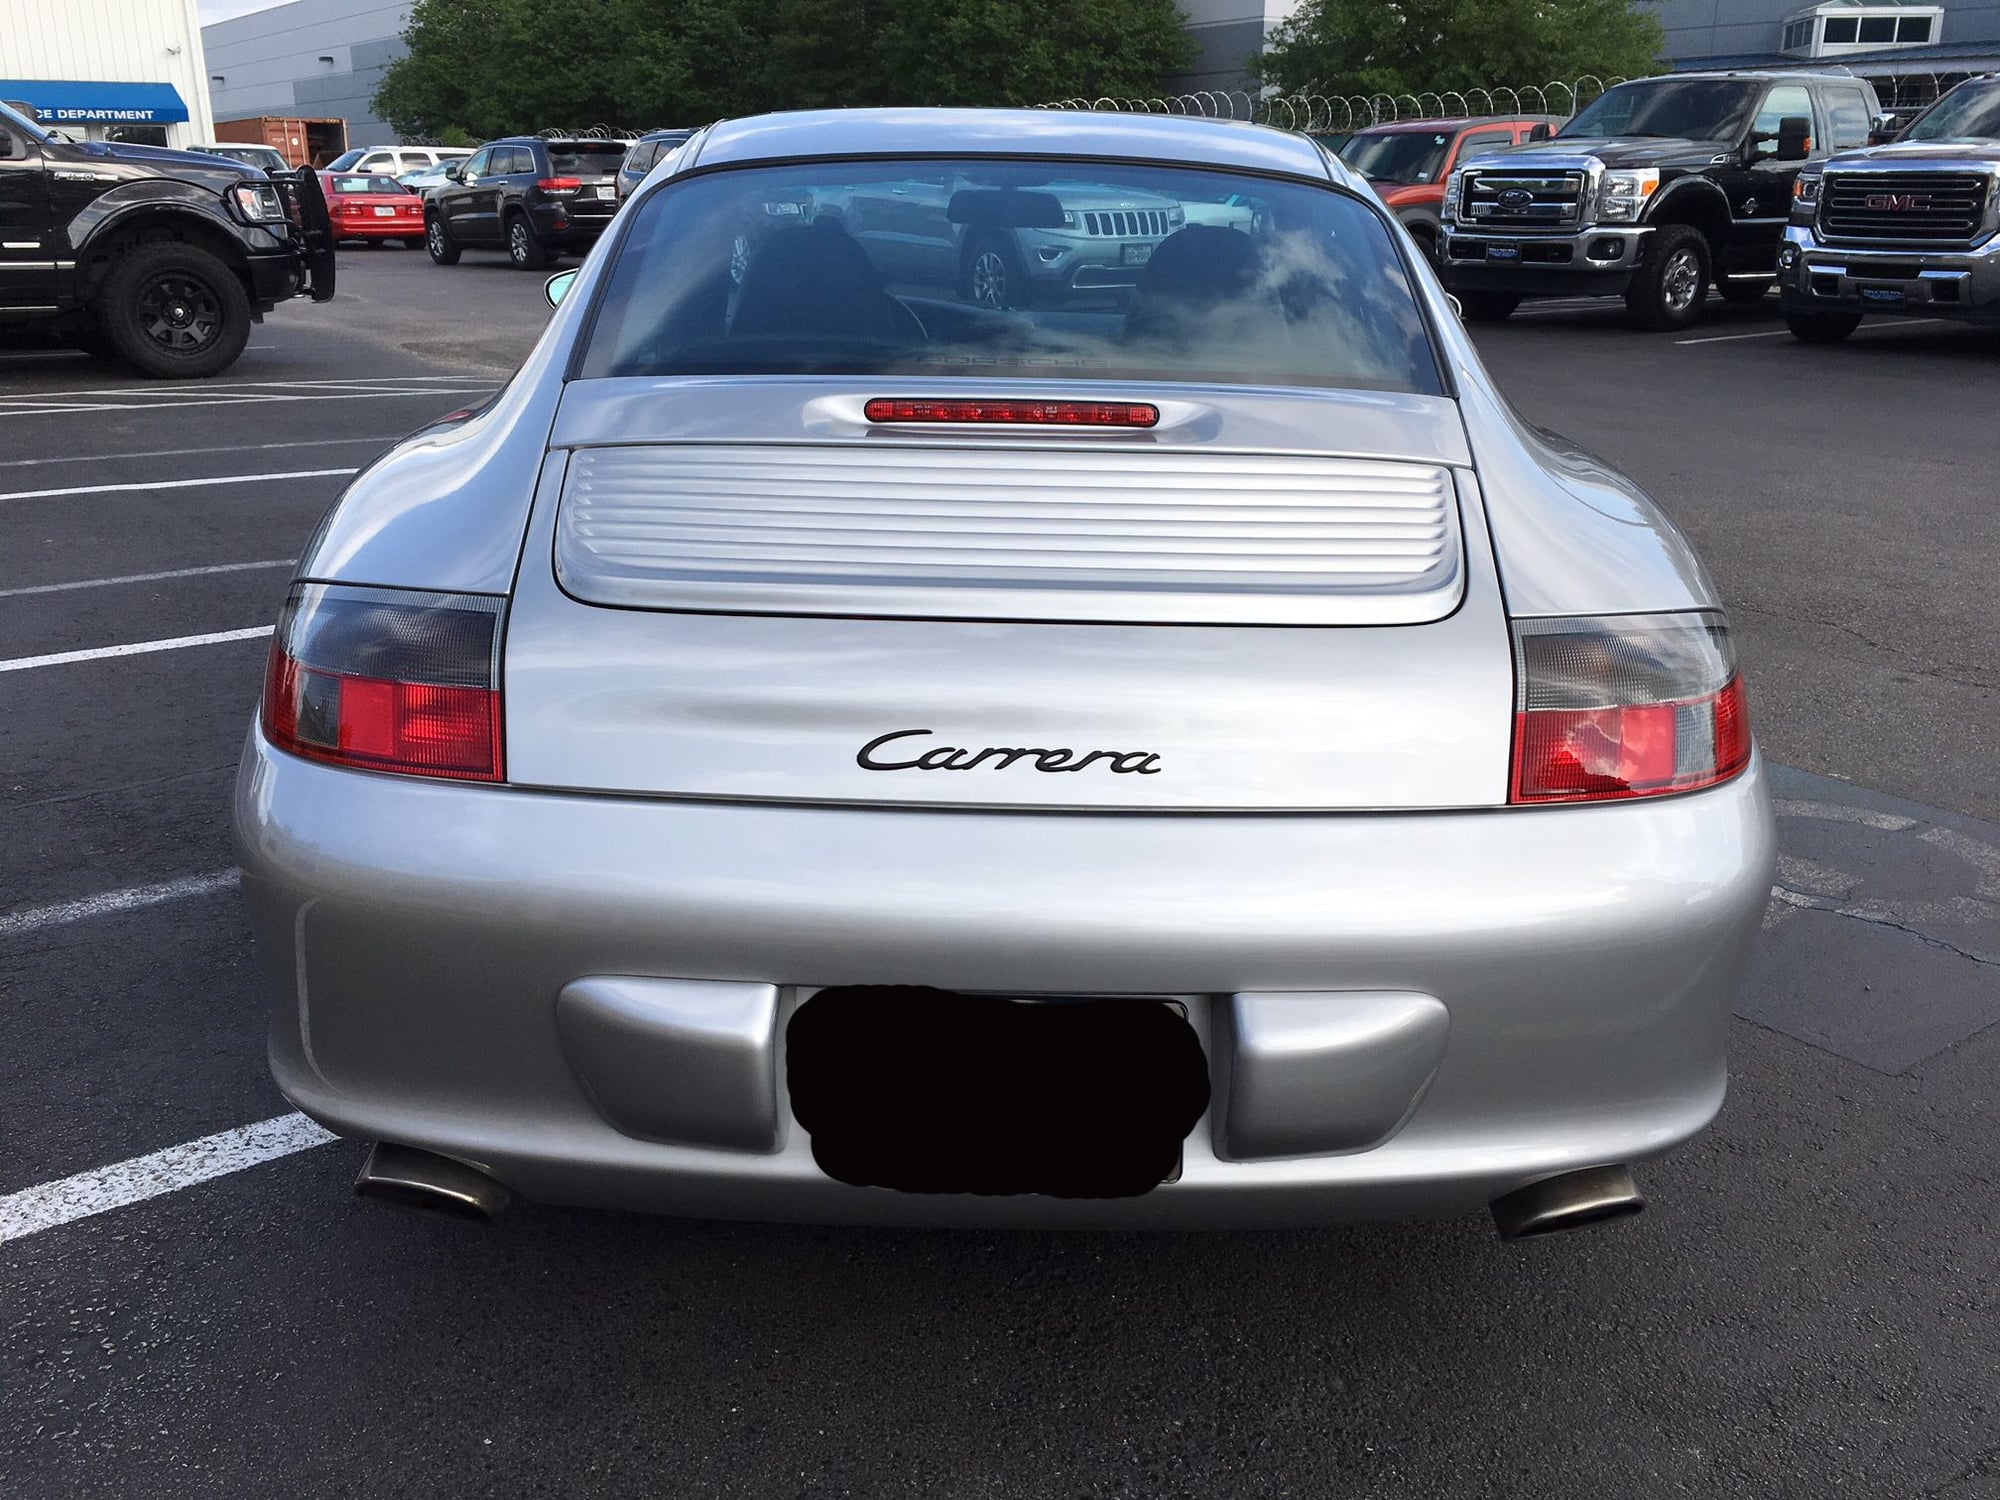 2004 Porsche 911 - 9300 mile 996 C2 -6 speed...Pristine condition...IMS done, fresh service, new tires. - Used - VIN WP0AA29934S620298 - 9,300 Miles - 2WD - Manual - Coupe - Silver - Alexandria, VA 22308, United States